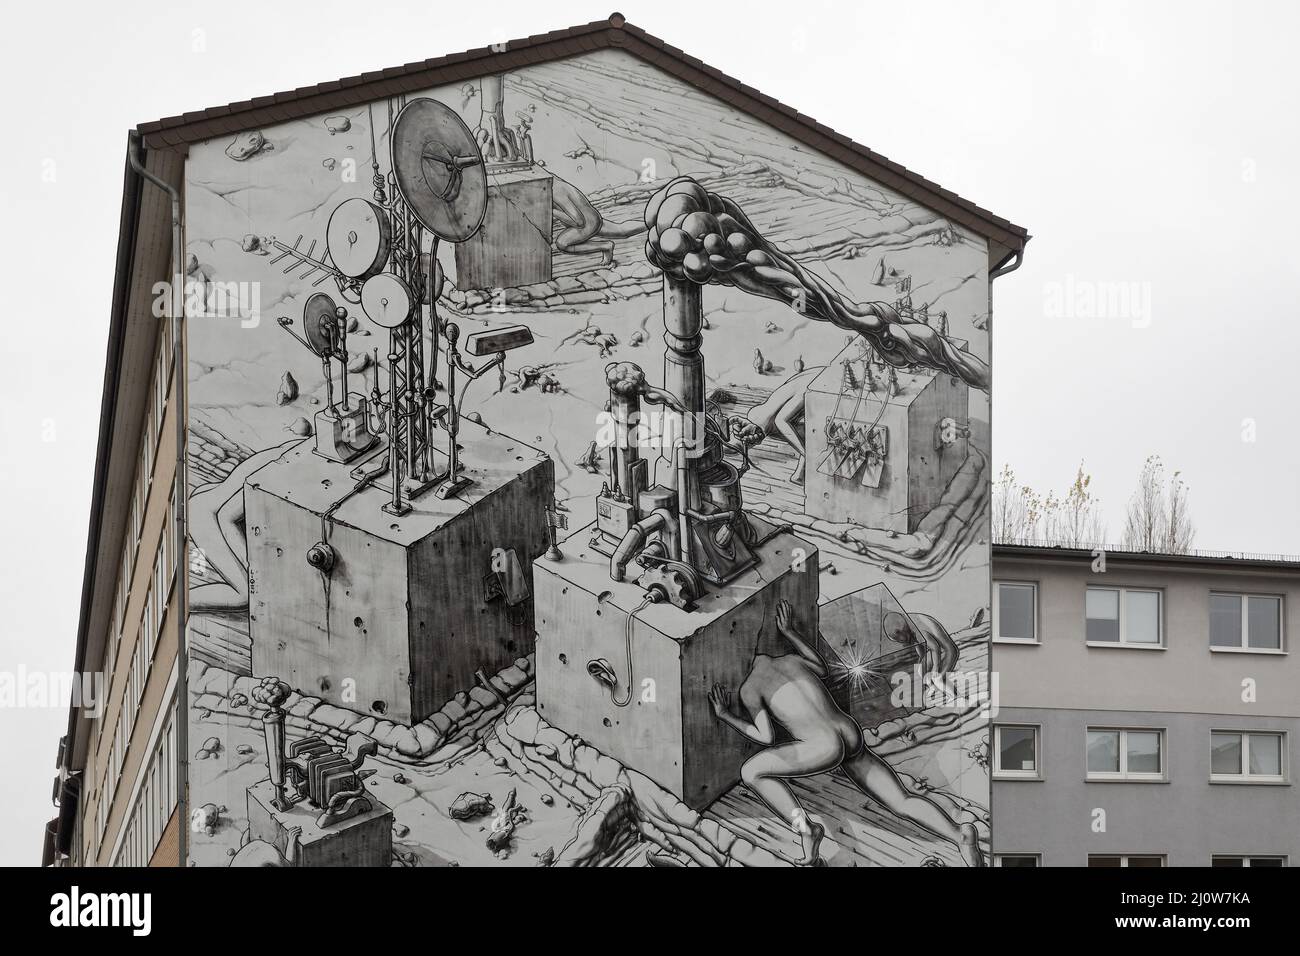 Street art with the title The blindness, artist Liqen, critical wall design, Kassel, Germany, Europe Stock Photo